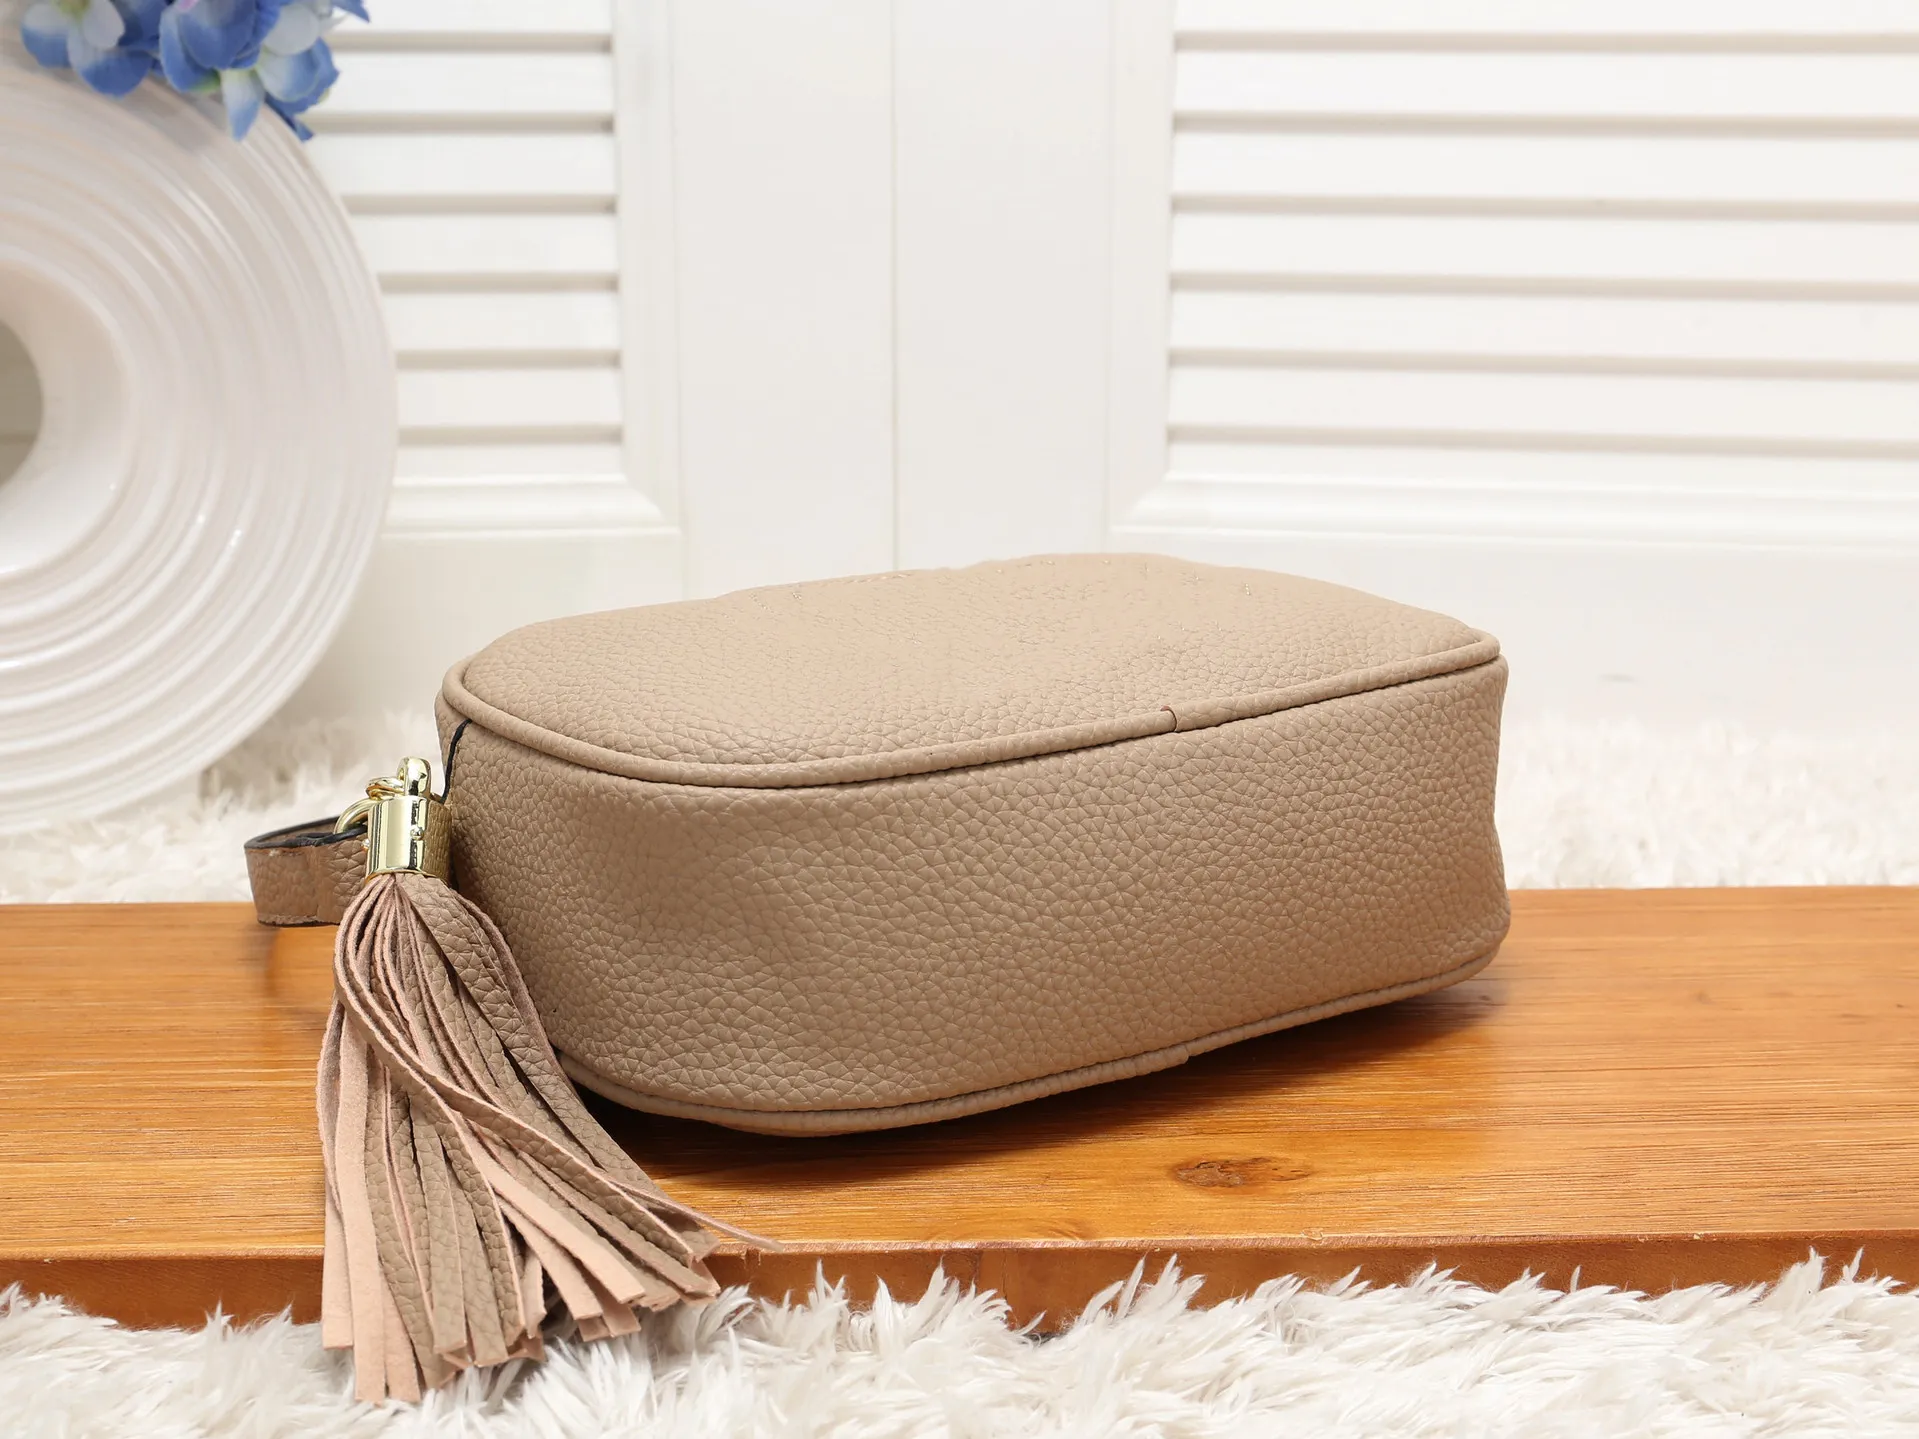 Designer ladies handbag messenger bag style outdoor casual fashion high quality all kinds of occasions tassel small square bags lychee pattern